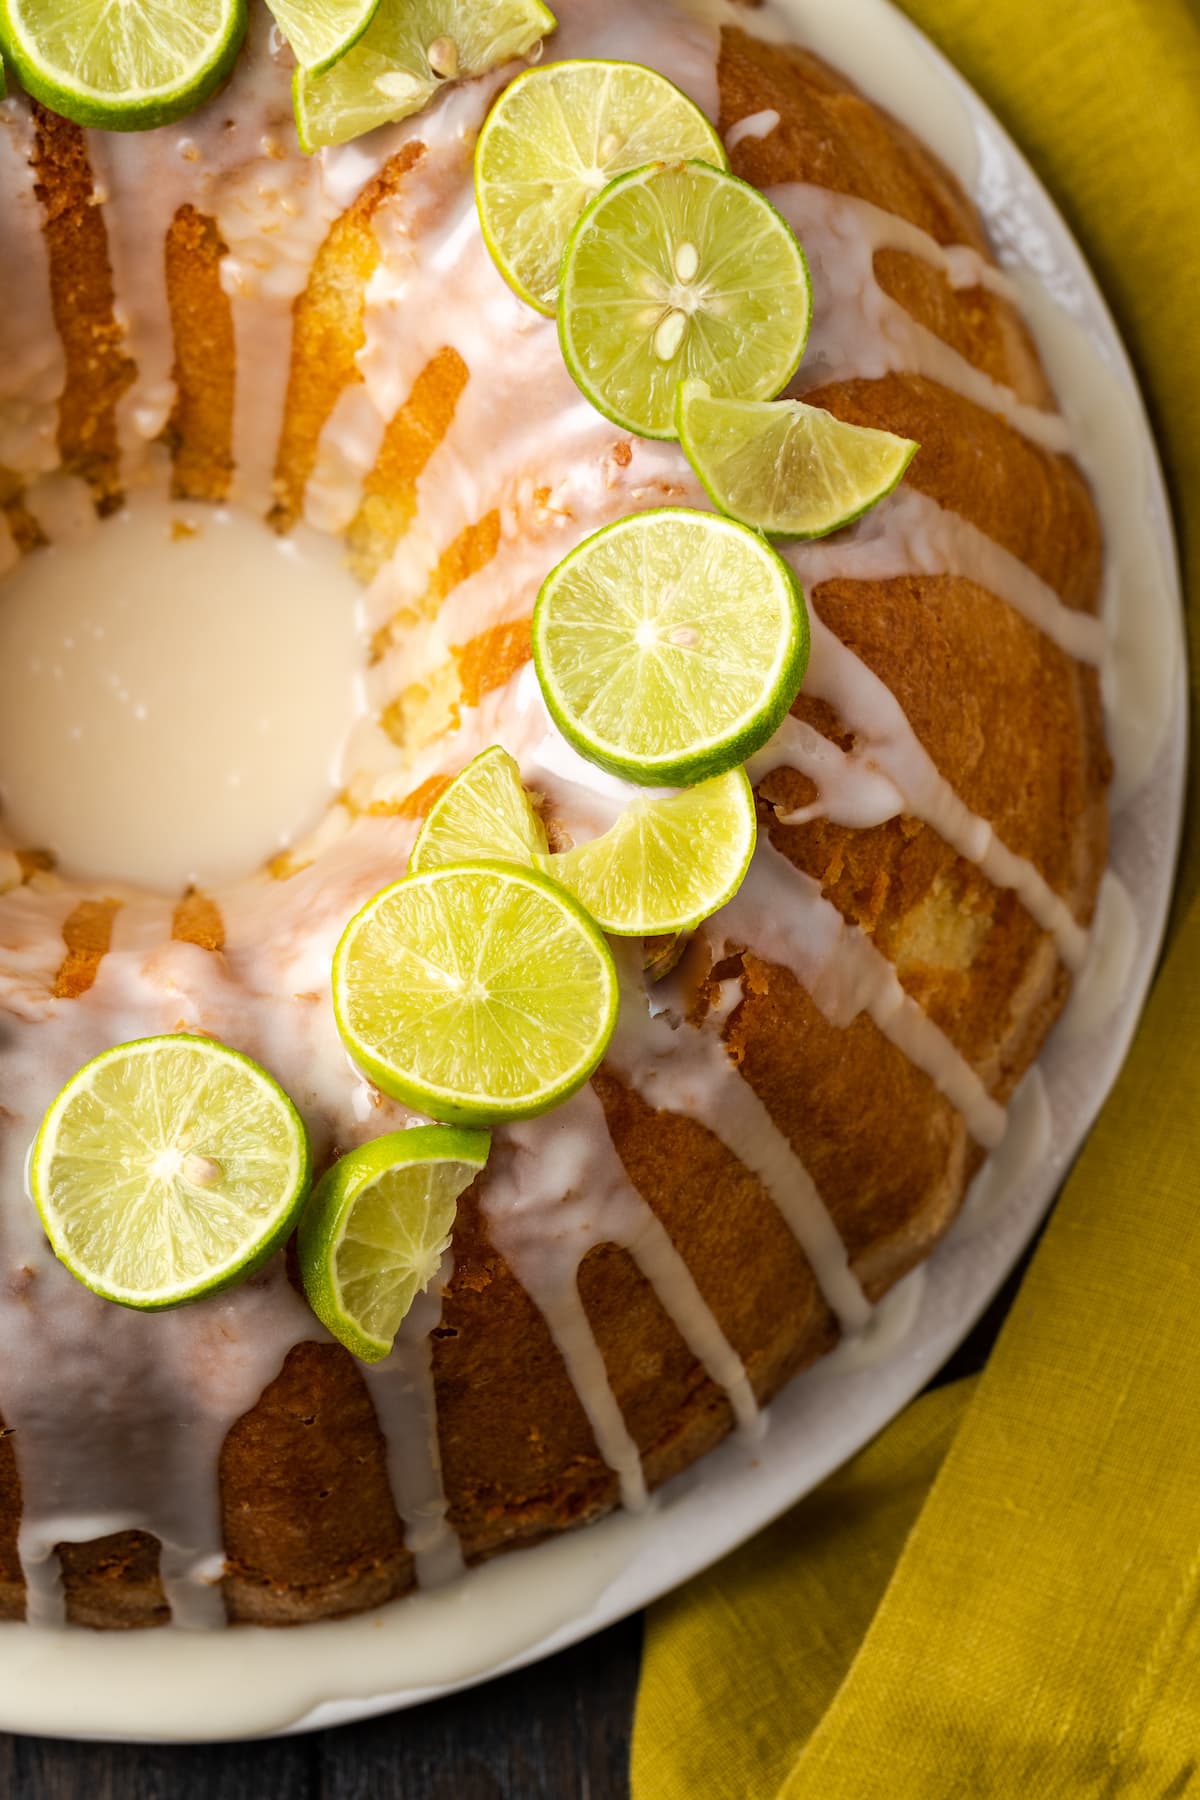 Overhead view of a full Key lime pound cake drizzled with icing and garnished with fresh limes.